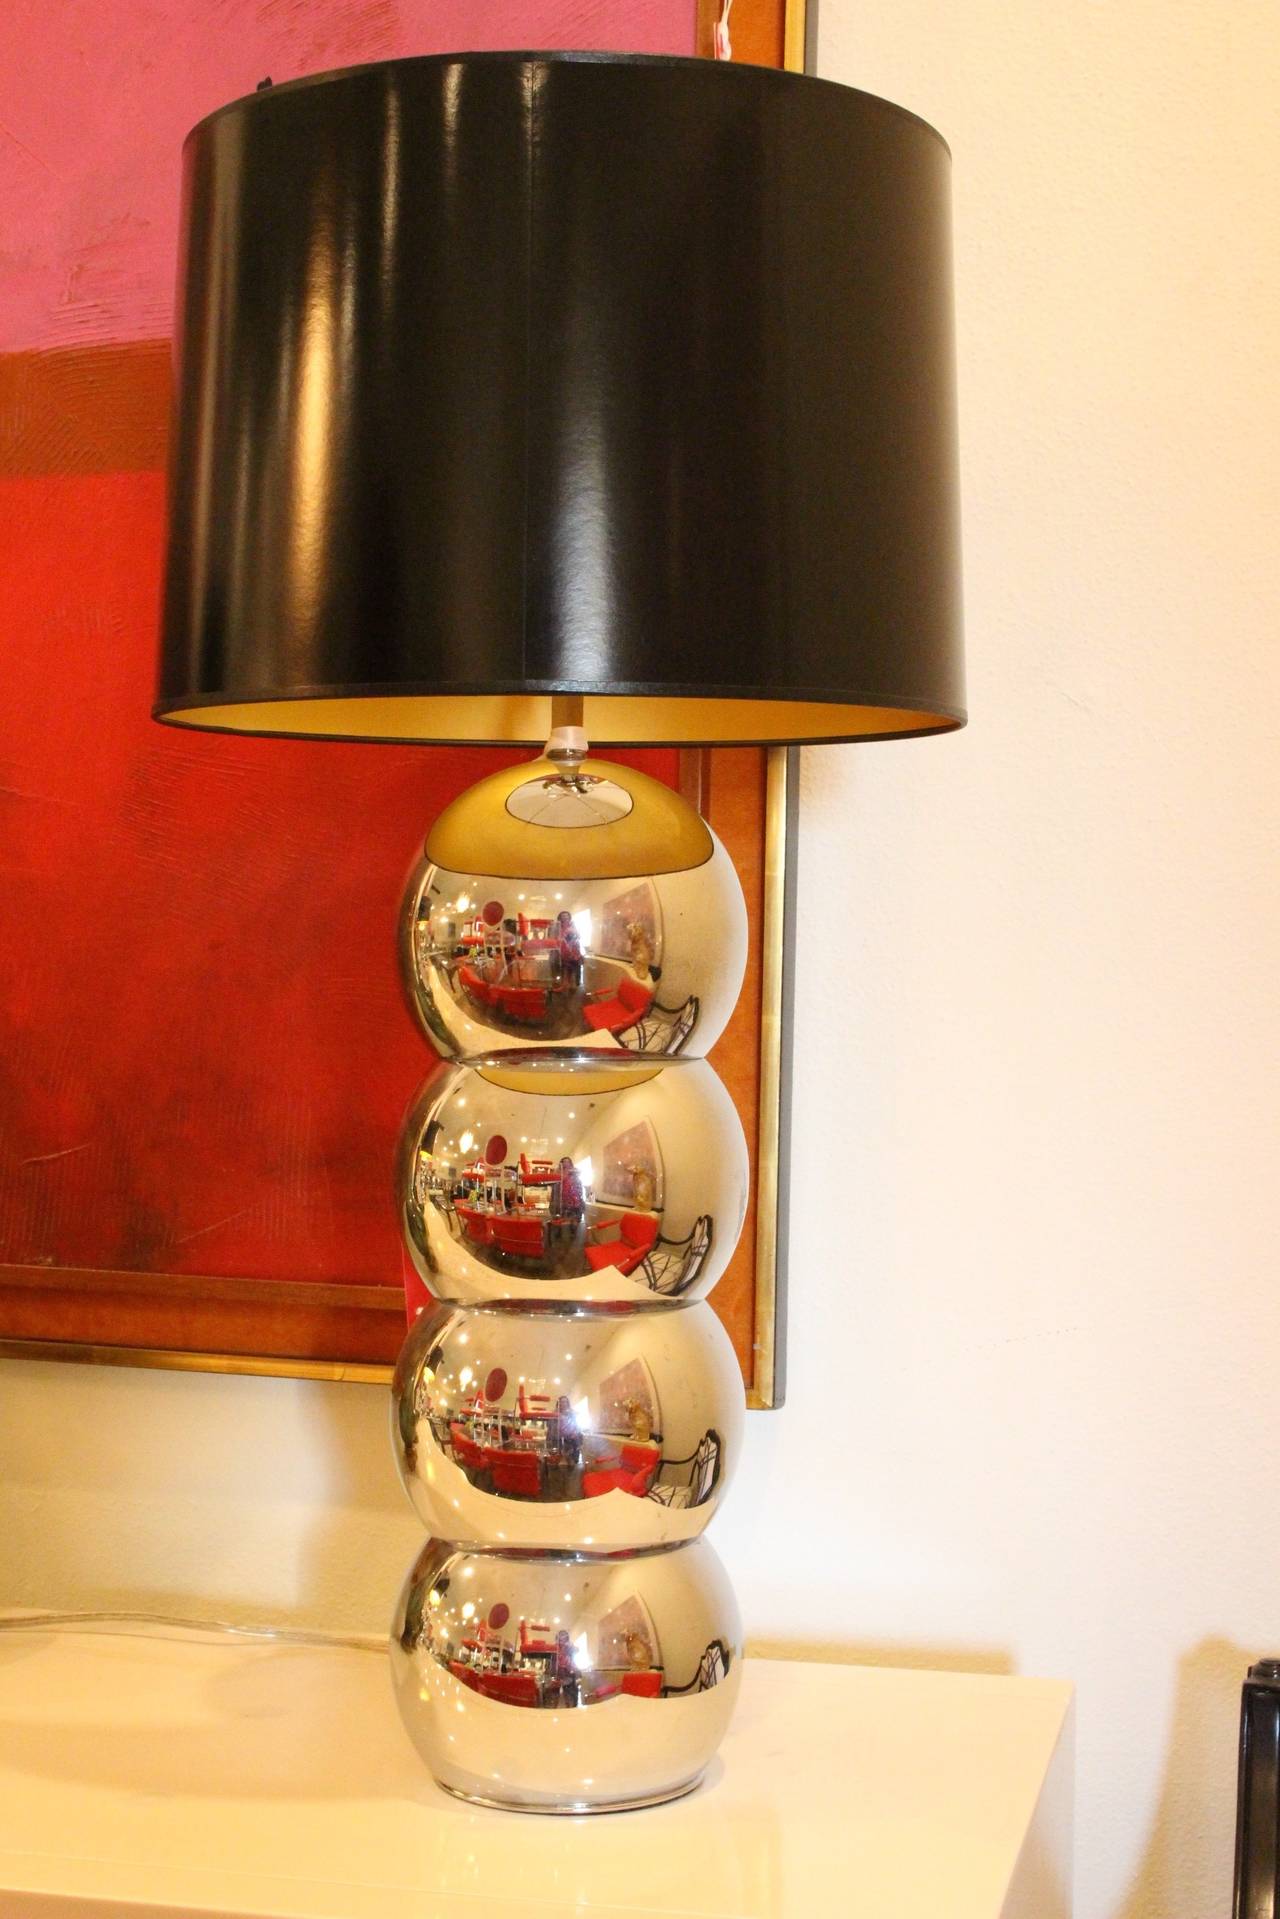 20th Century Pair of Chrome Ball Lamps by George Kovacs